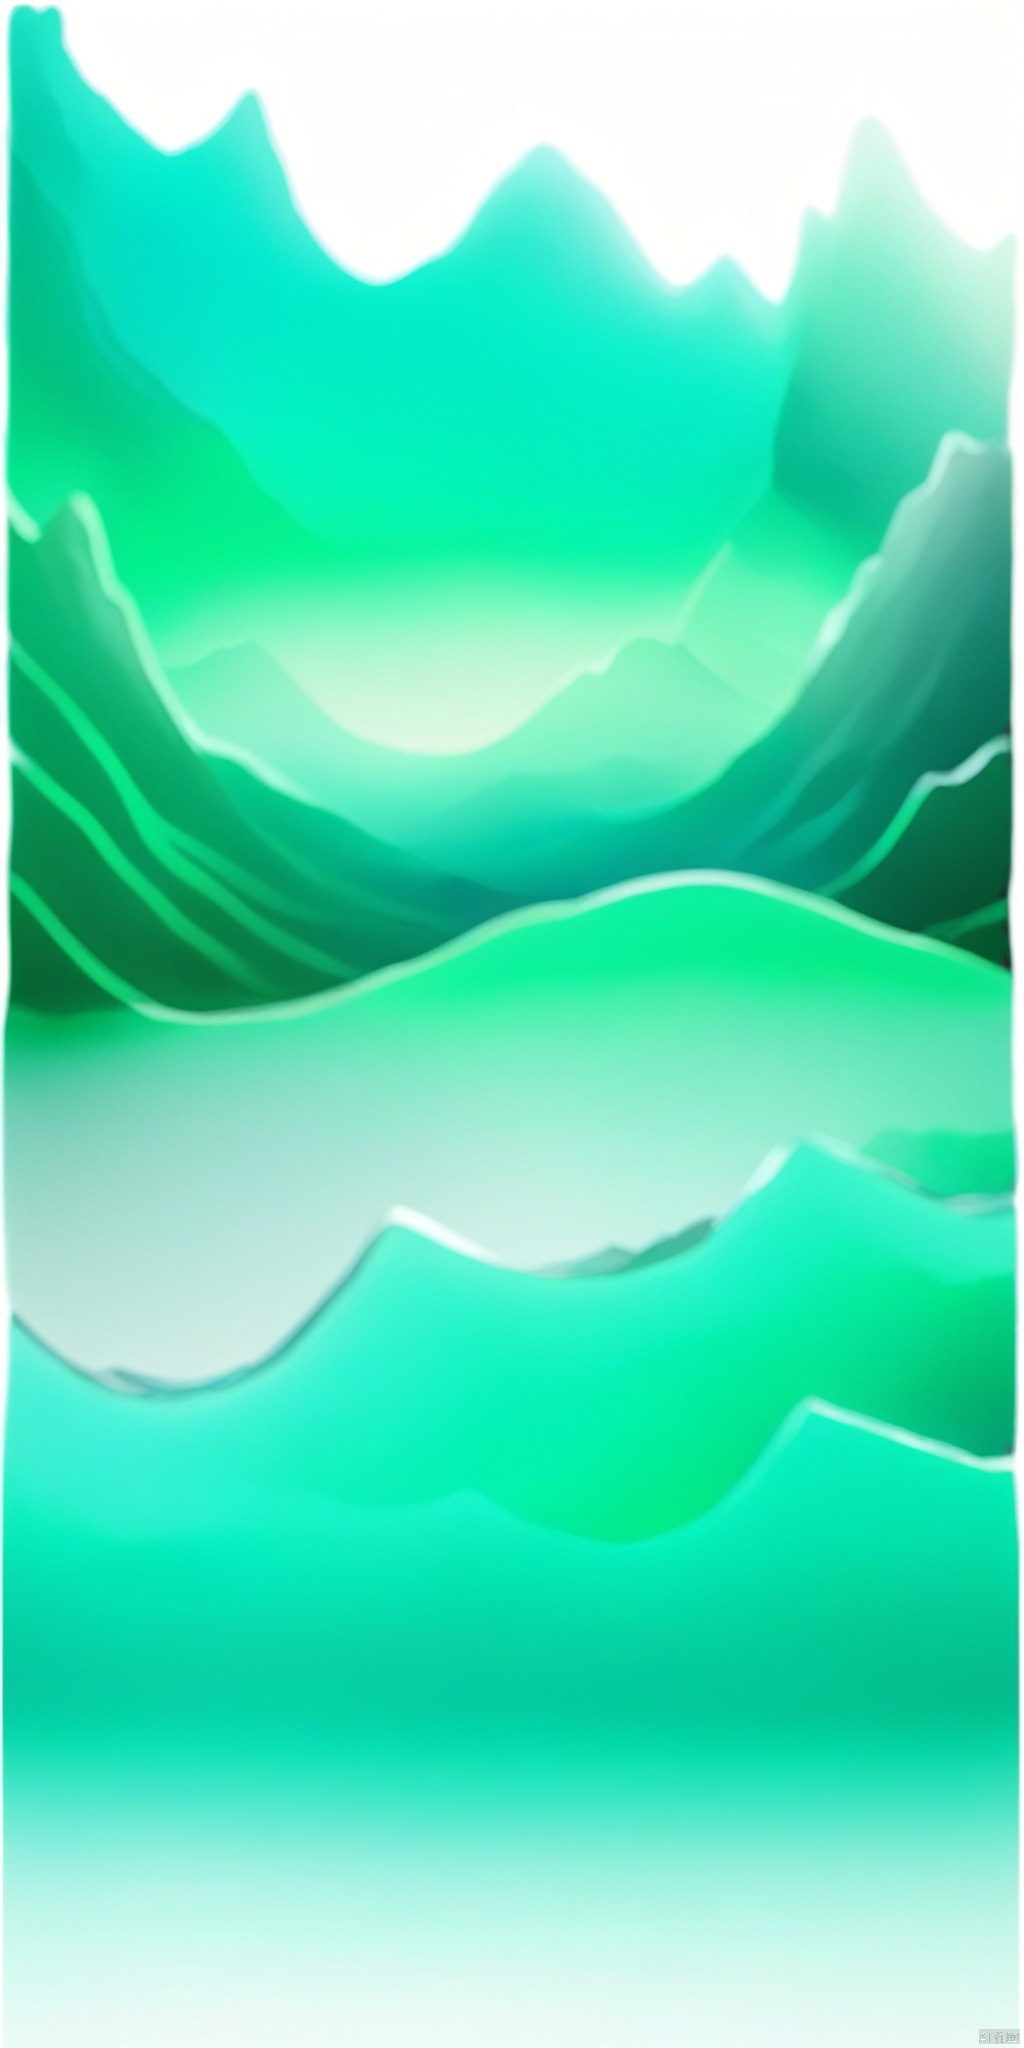 Best picture quality, masterpiece, Simple and modern landscape, Chinese style, soft and smooth lines, soft gradient colors, mountains, lakes , scenery,  jade,Contour lines, soft low polygon style, Gradient background, feicuixl